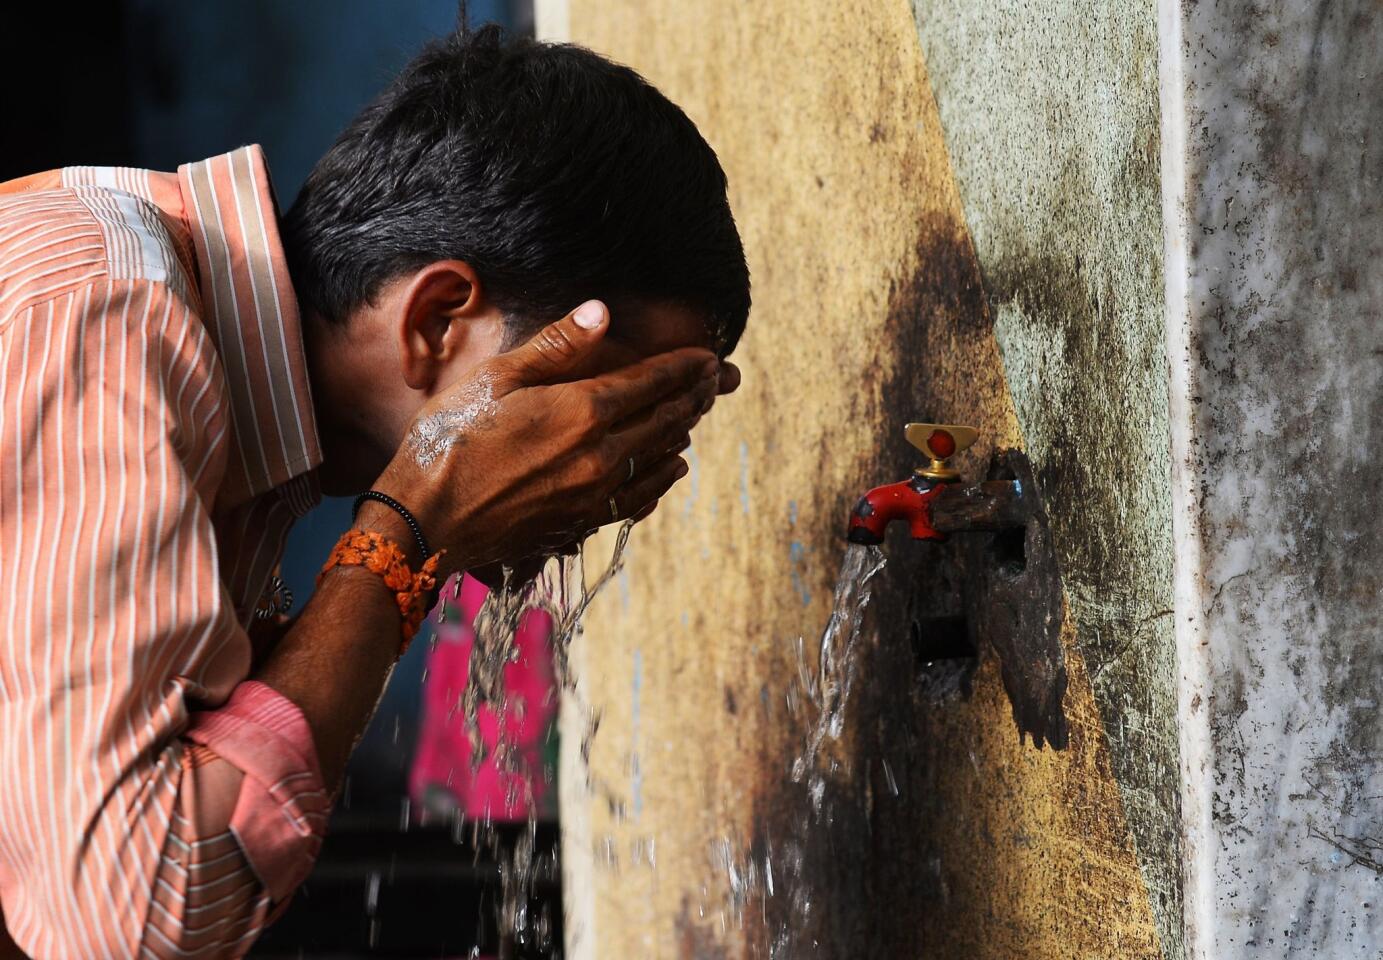 An Indian man washes his face at a roadside tap in New Delhi. Hospitals in India battled to treat victims of a blistering heat wave that has claimed nearly 1,500 lives in just over a week -- the highest number recorded in two decades.